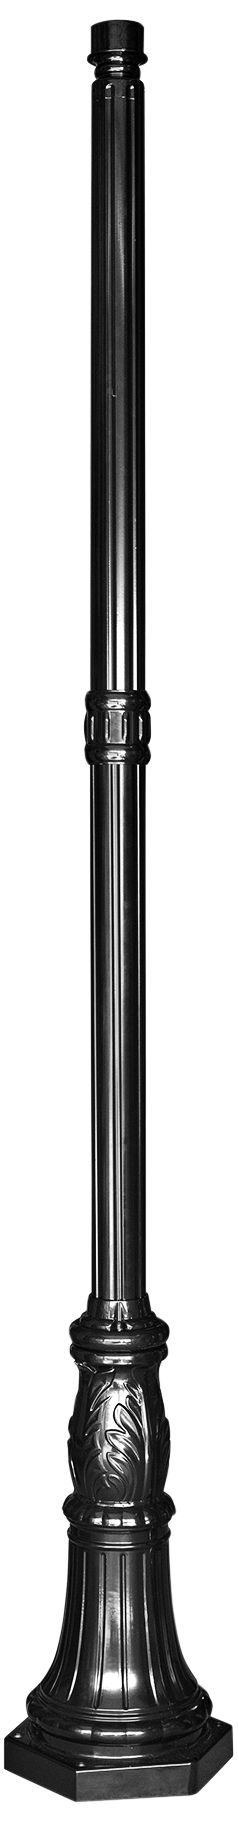 Commercial 96" High Black Outdoor Post Light Pole